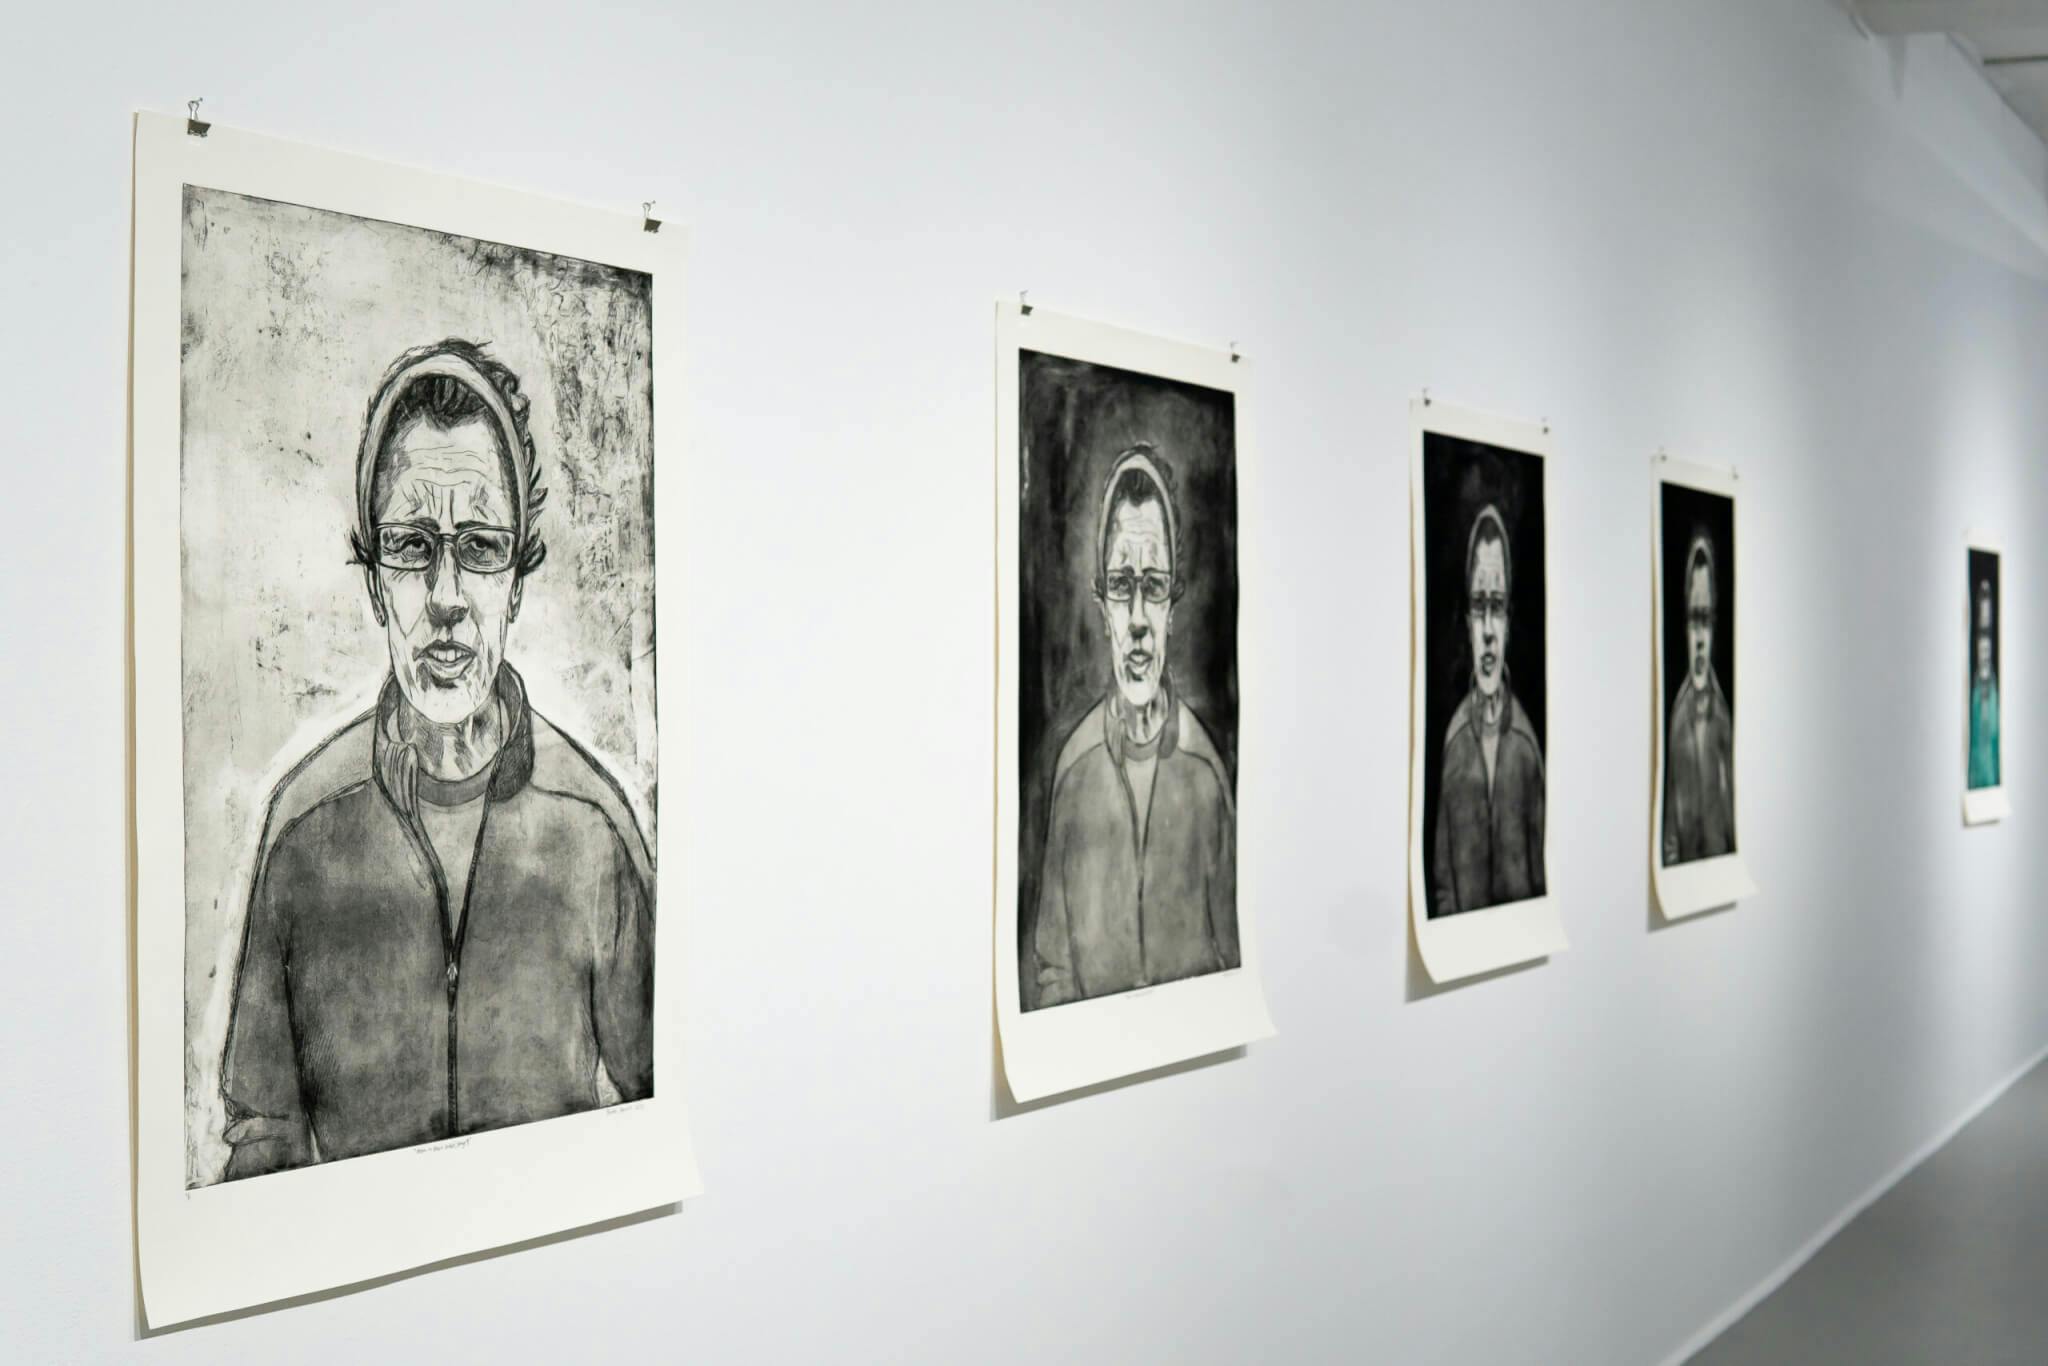 Installation view of "Mom in the Green Jacket" by Brooke Stewart, including works in progress.